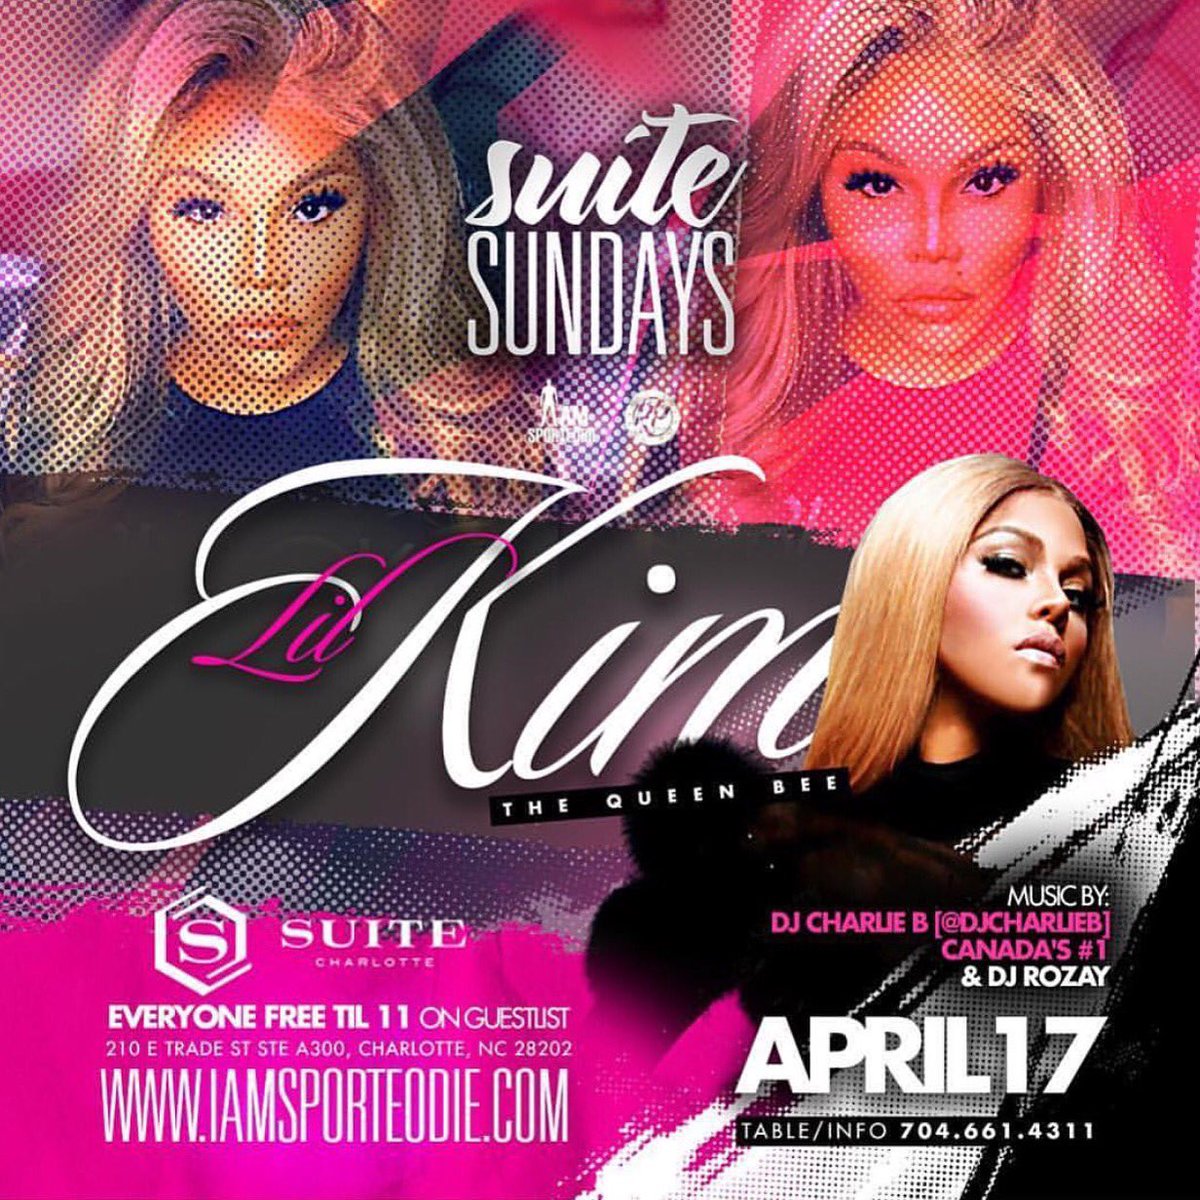 This Sunday 4/17 I need all of North Carolina and South Carolina to come rock out with me!!! https://t.co/akABY7z1bj https://t.co/mTrsrDXK58